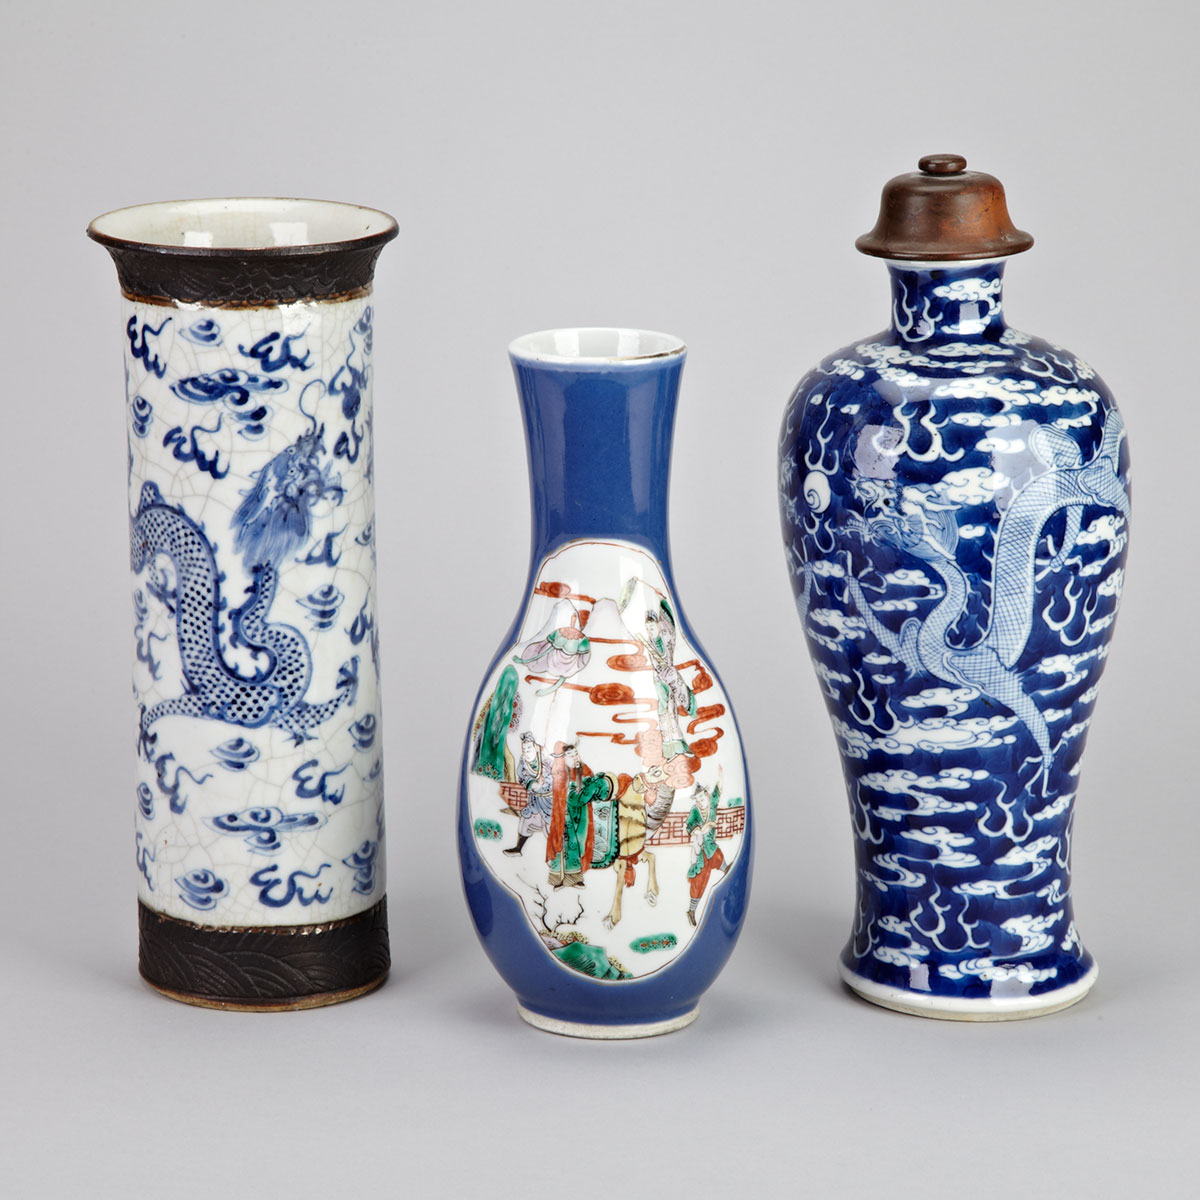 Group of Three Porcelain Vases, China, 19th/20th Century 